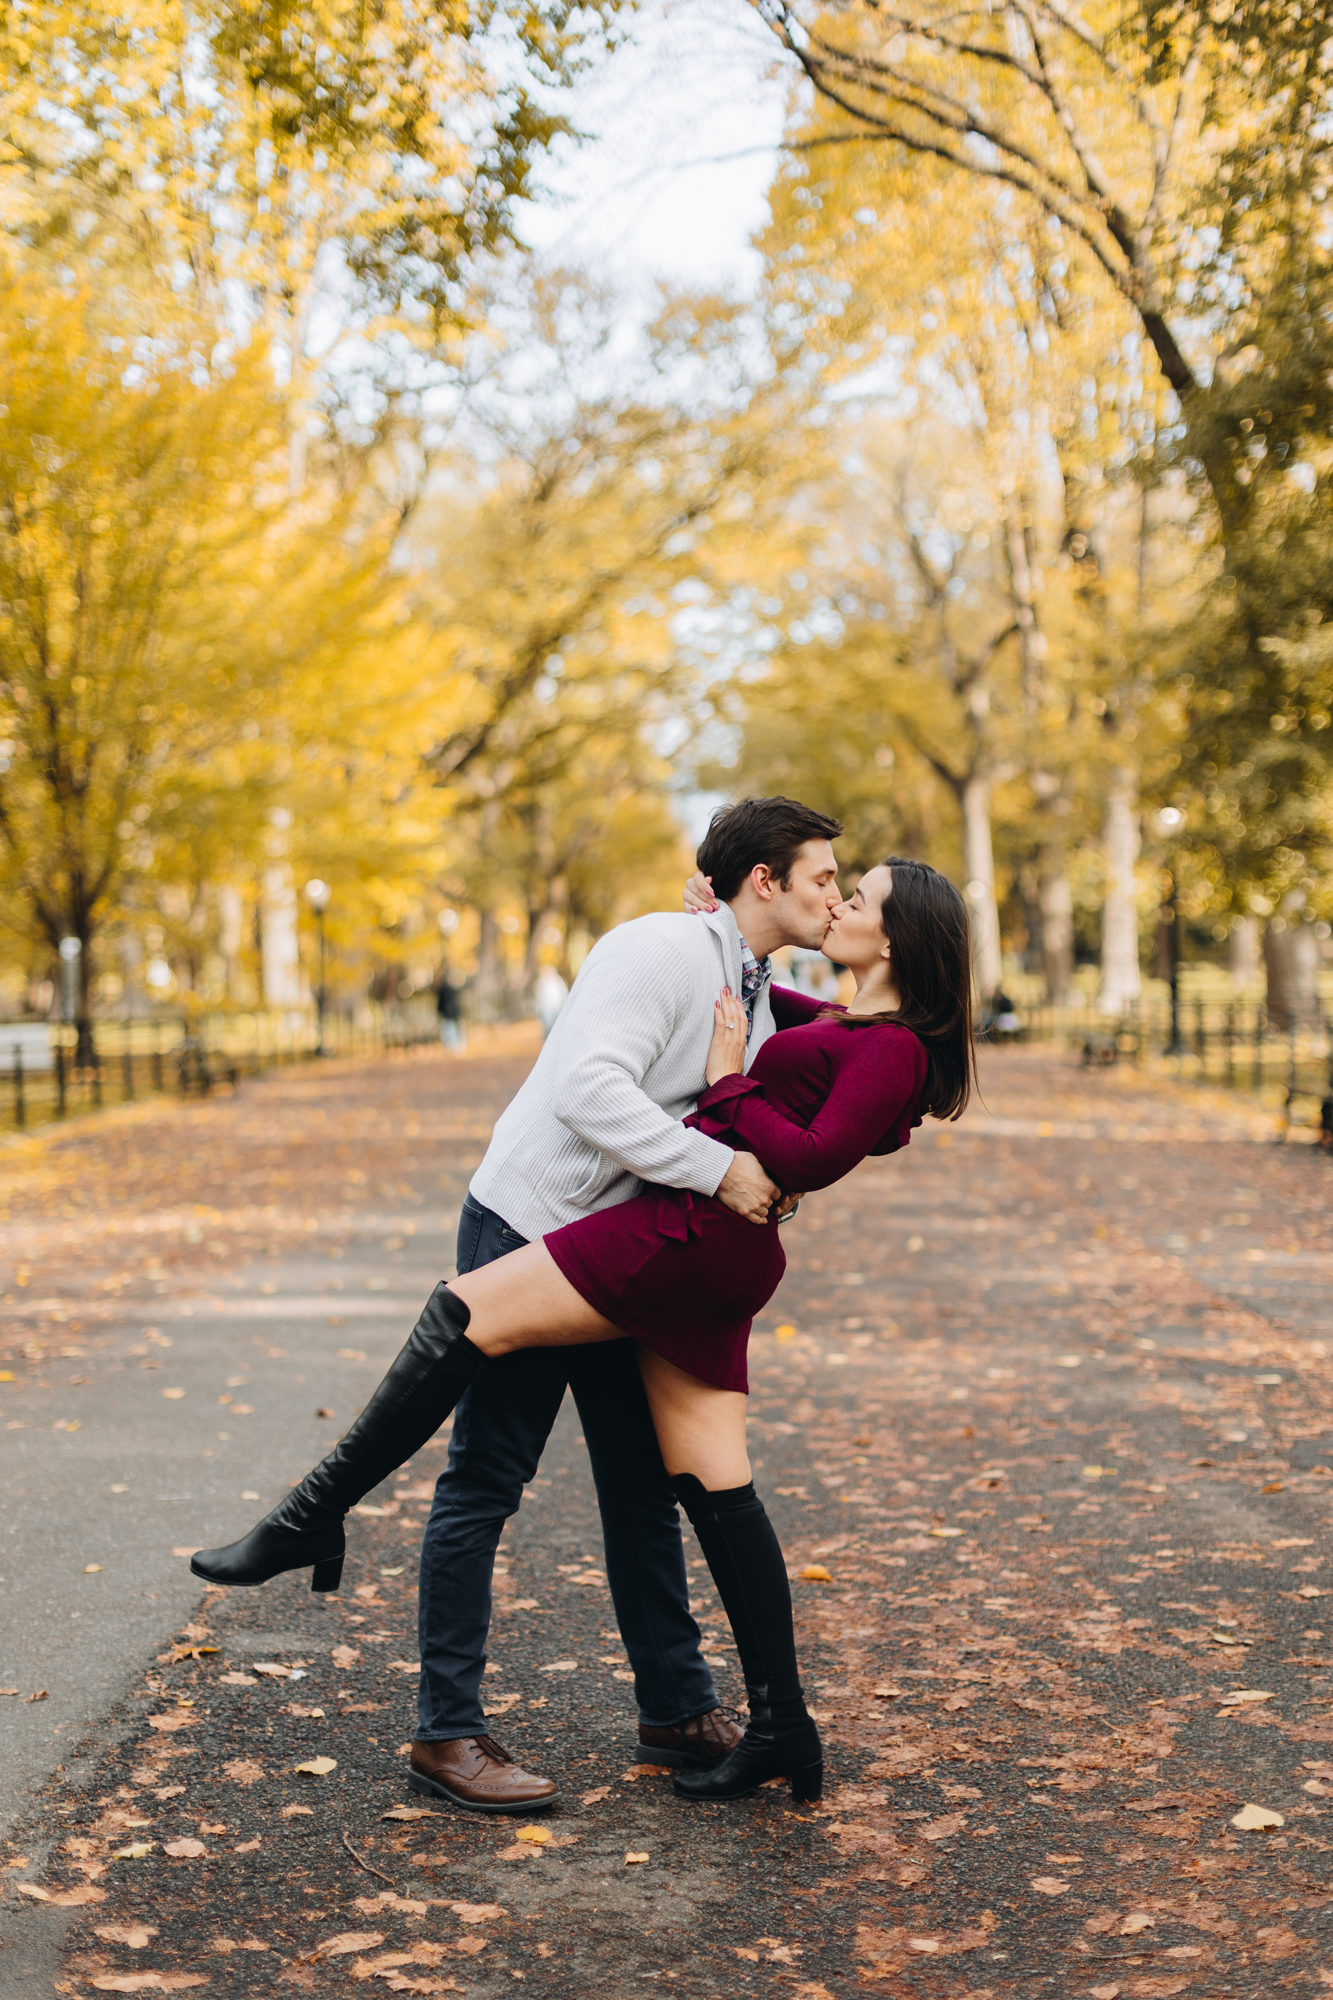 Scenic Fall Engagement Photos in Central Park New York